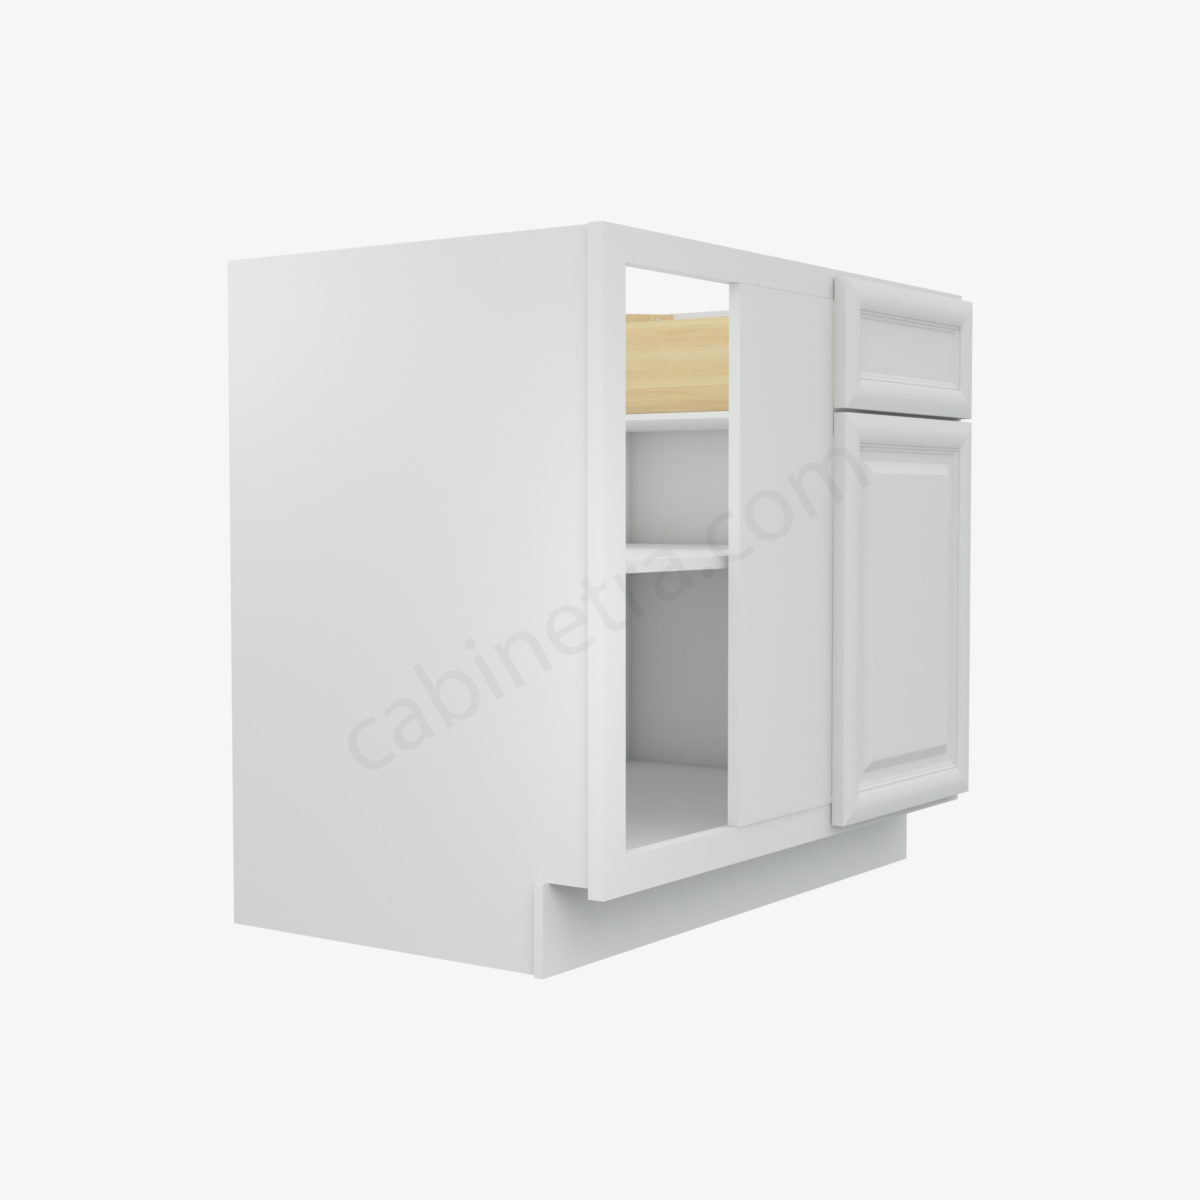 KW BBLC39 42 36W 4  Forevermark K White Cabinetra scaled